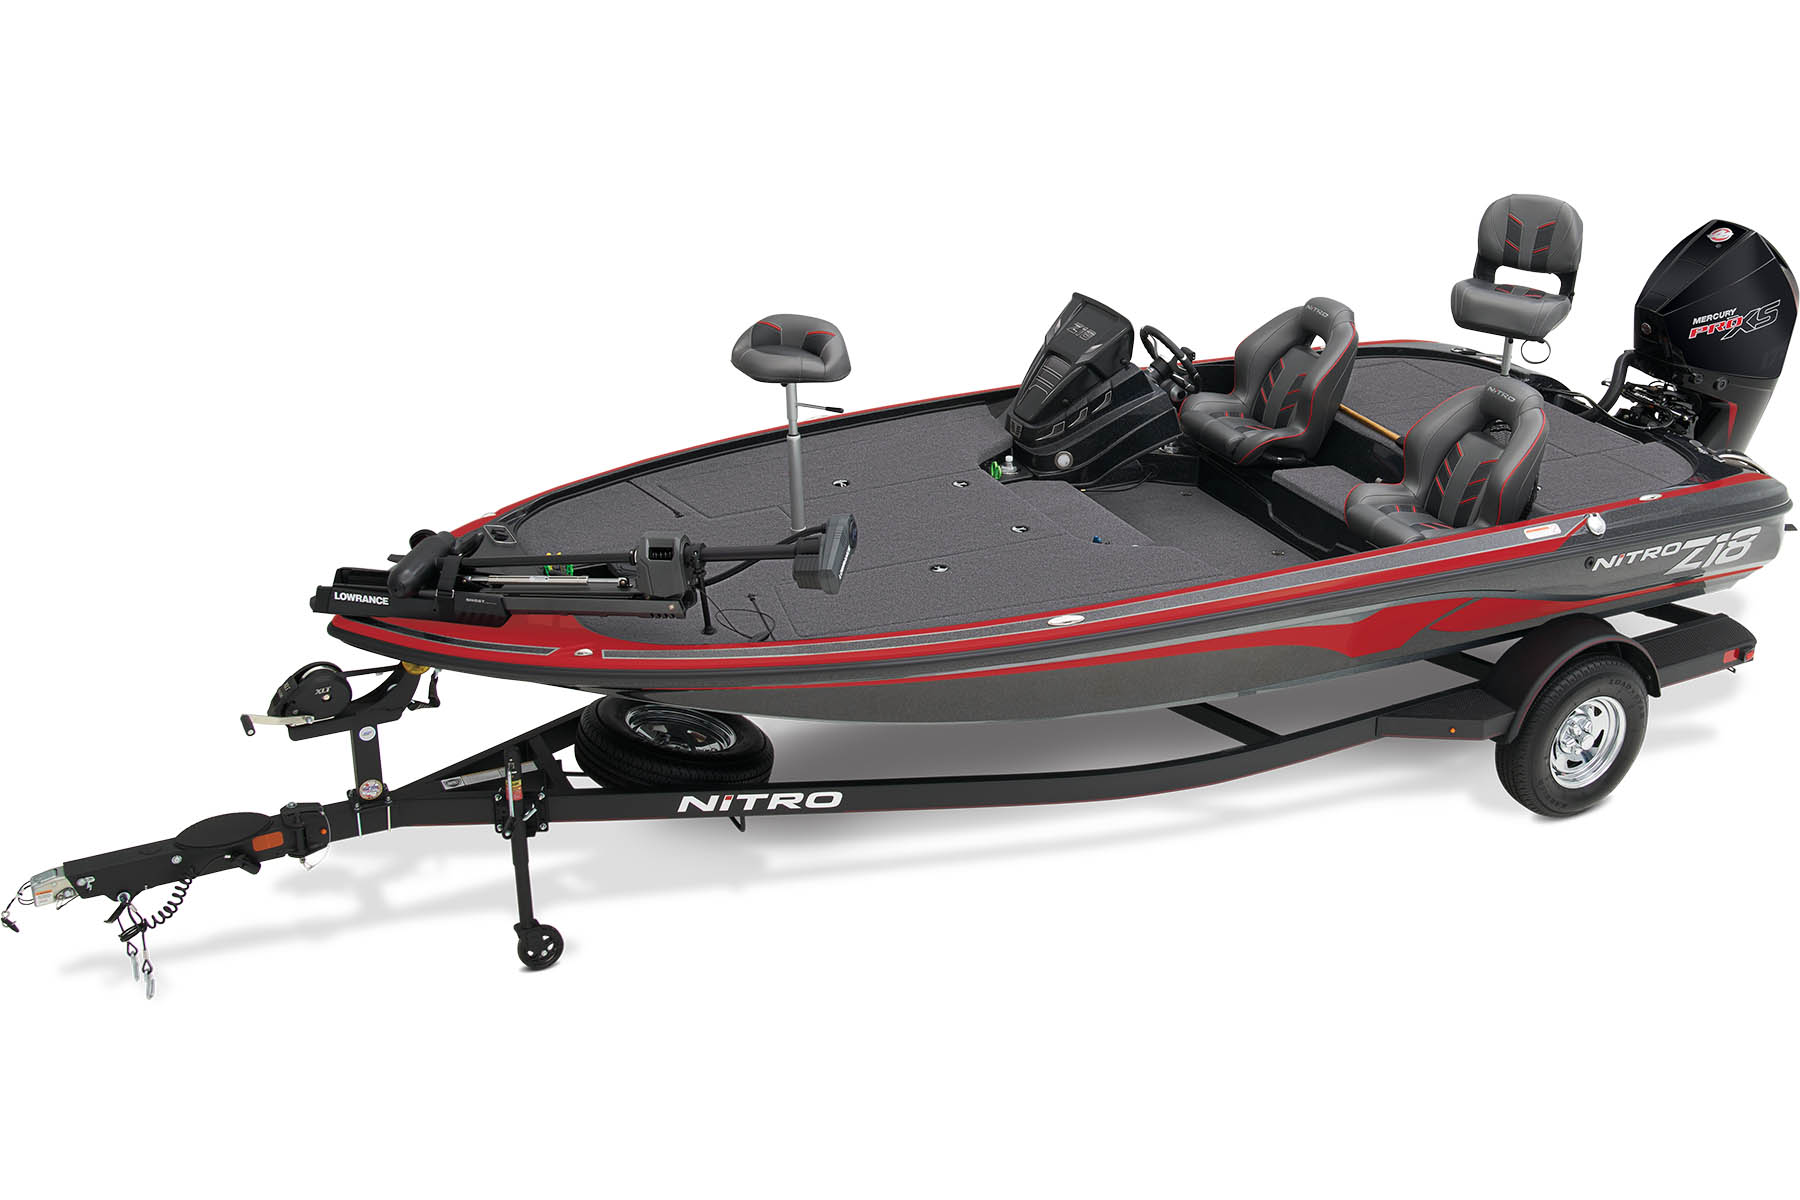 Lund Boats - Skinny water or big chop, the Pro-V Bass gets it done